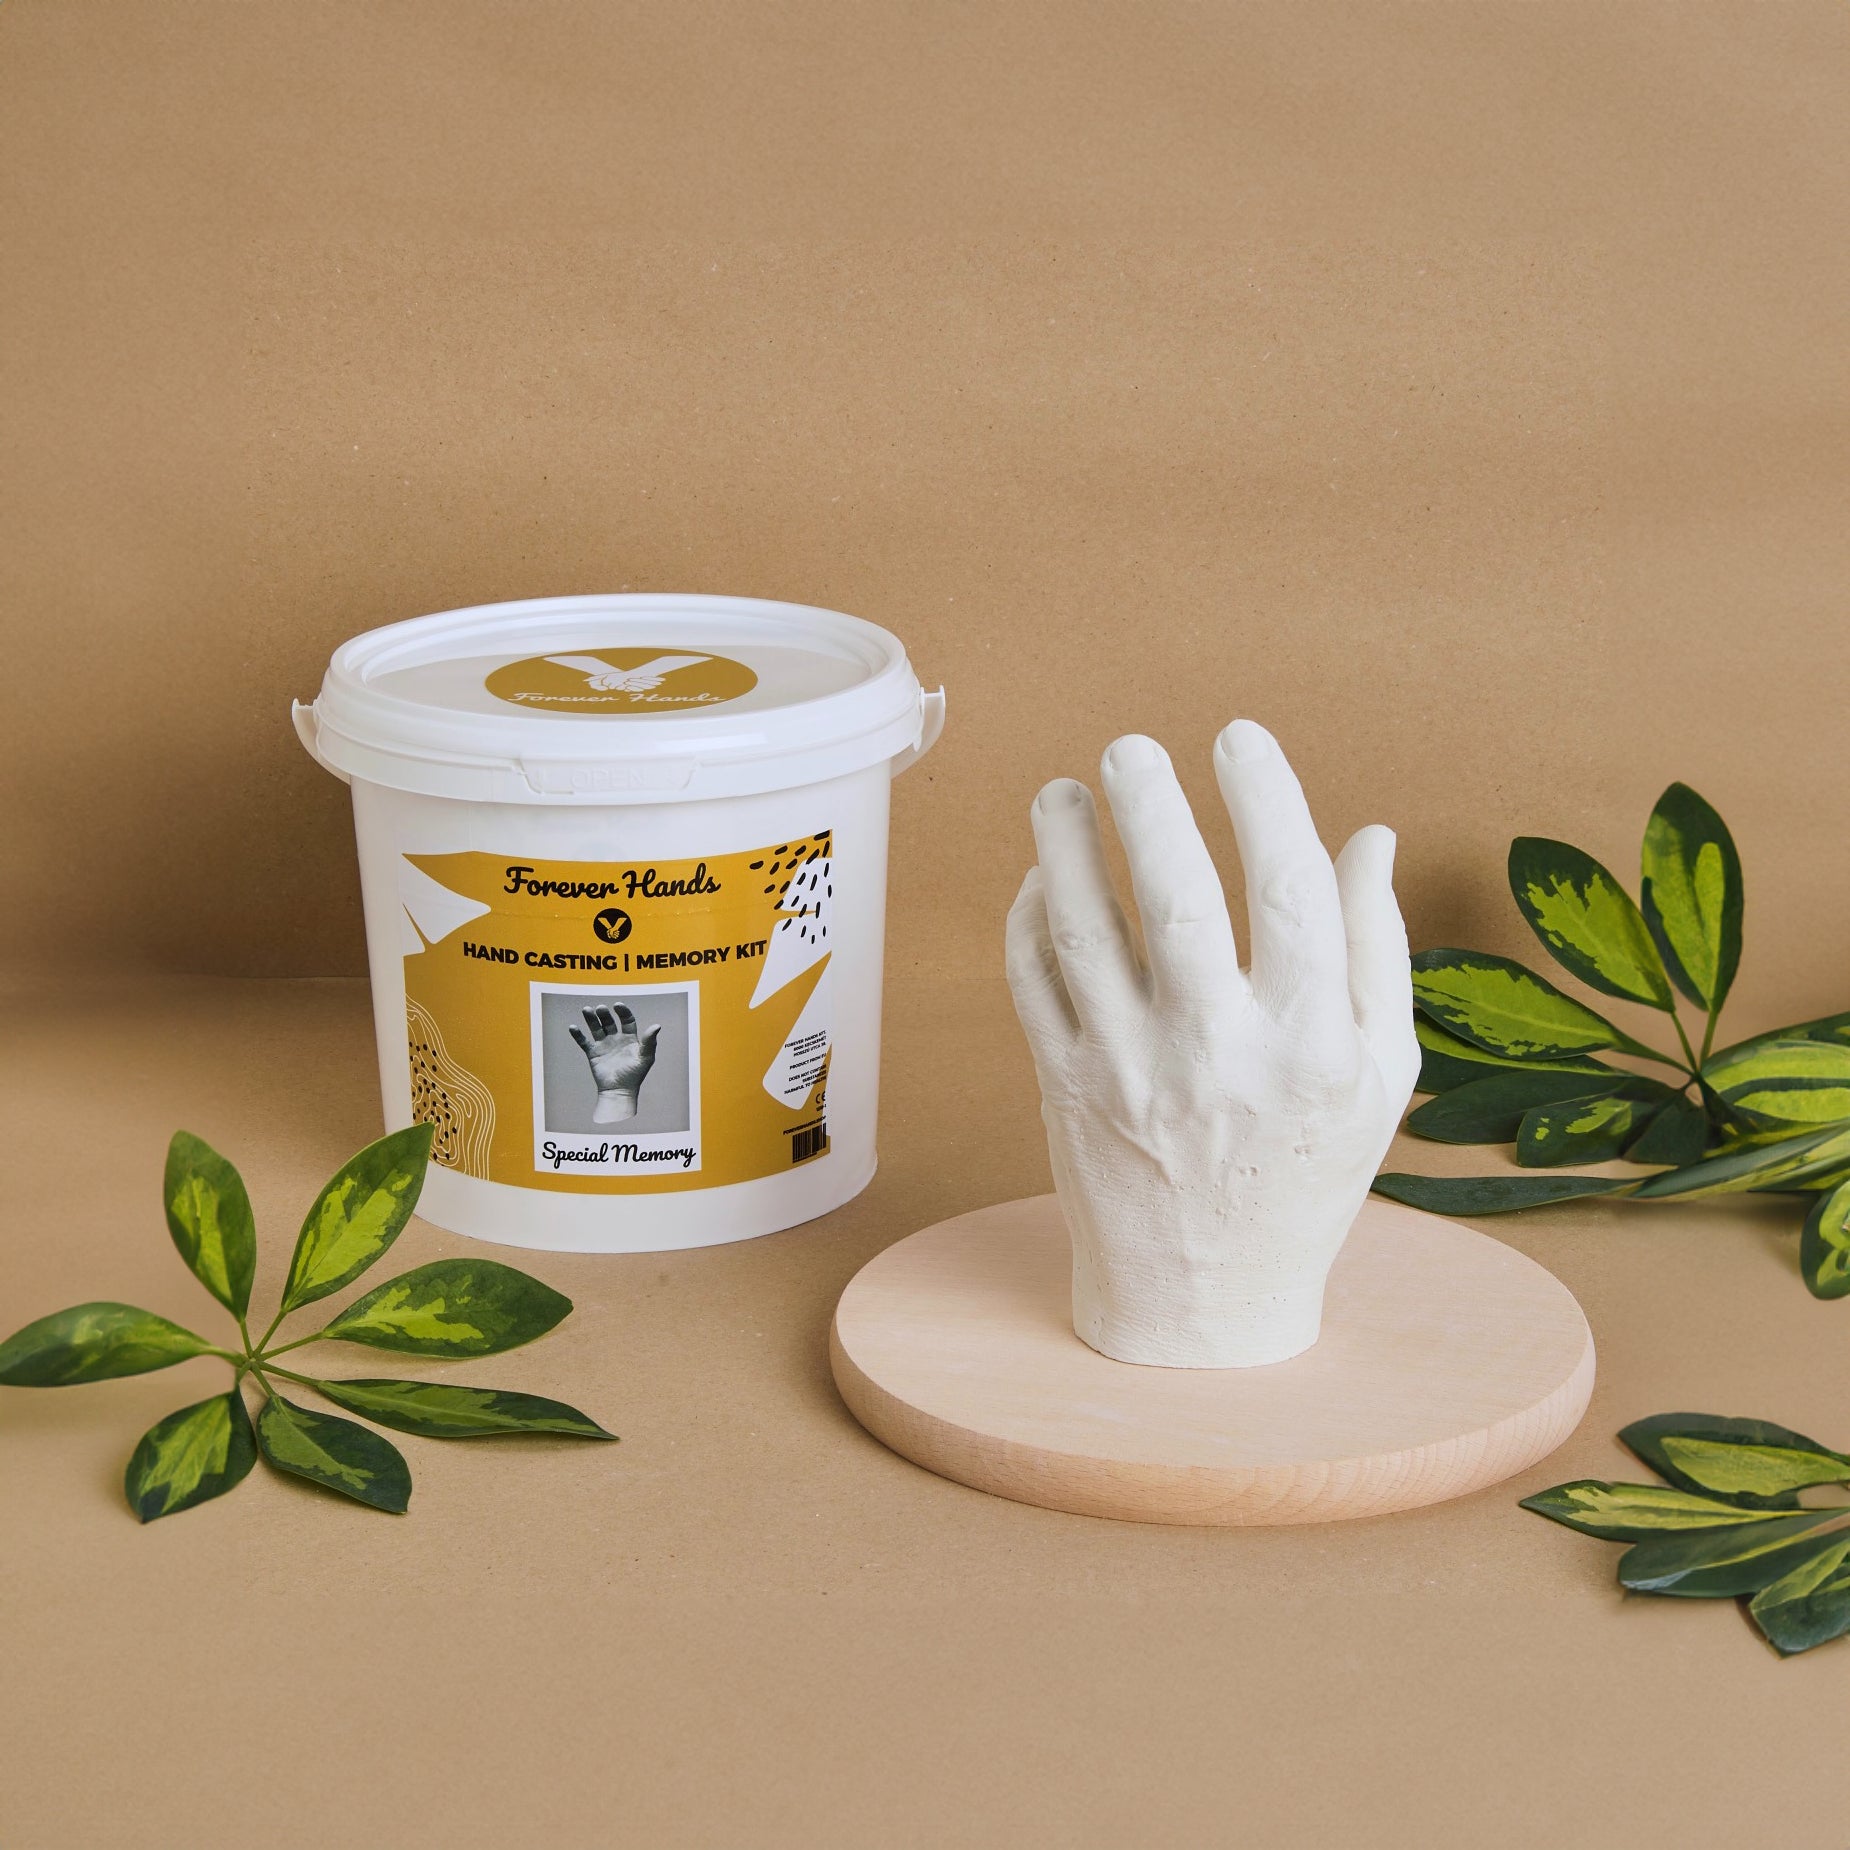 Hand Casting Kit | Solo